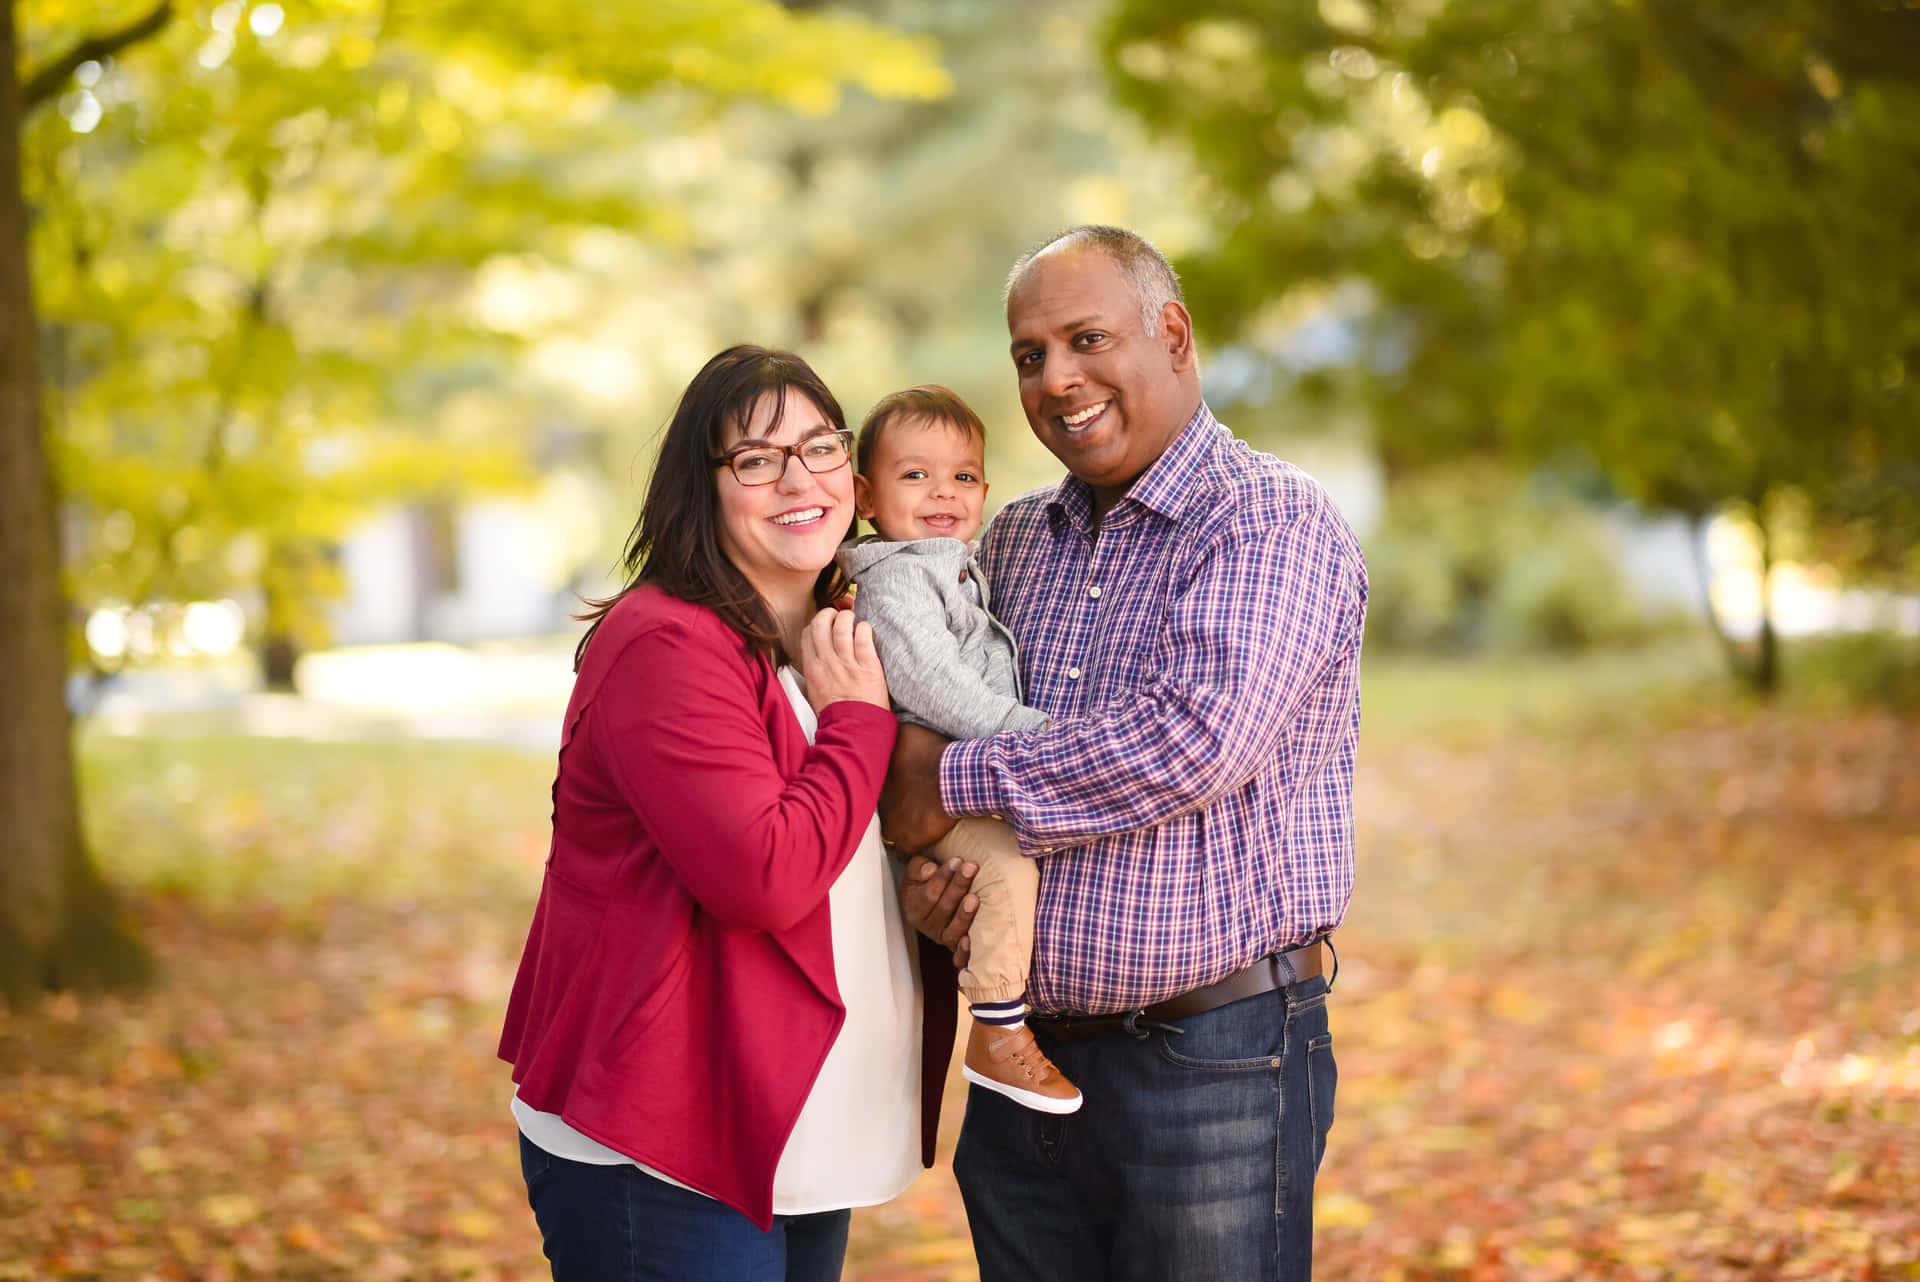 A Family Poses For A Photo In The Fall